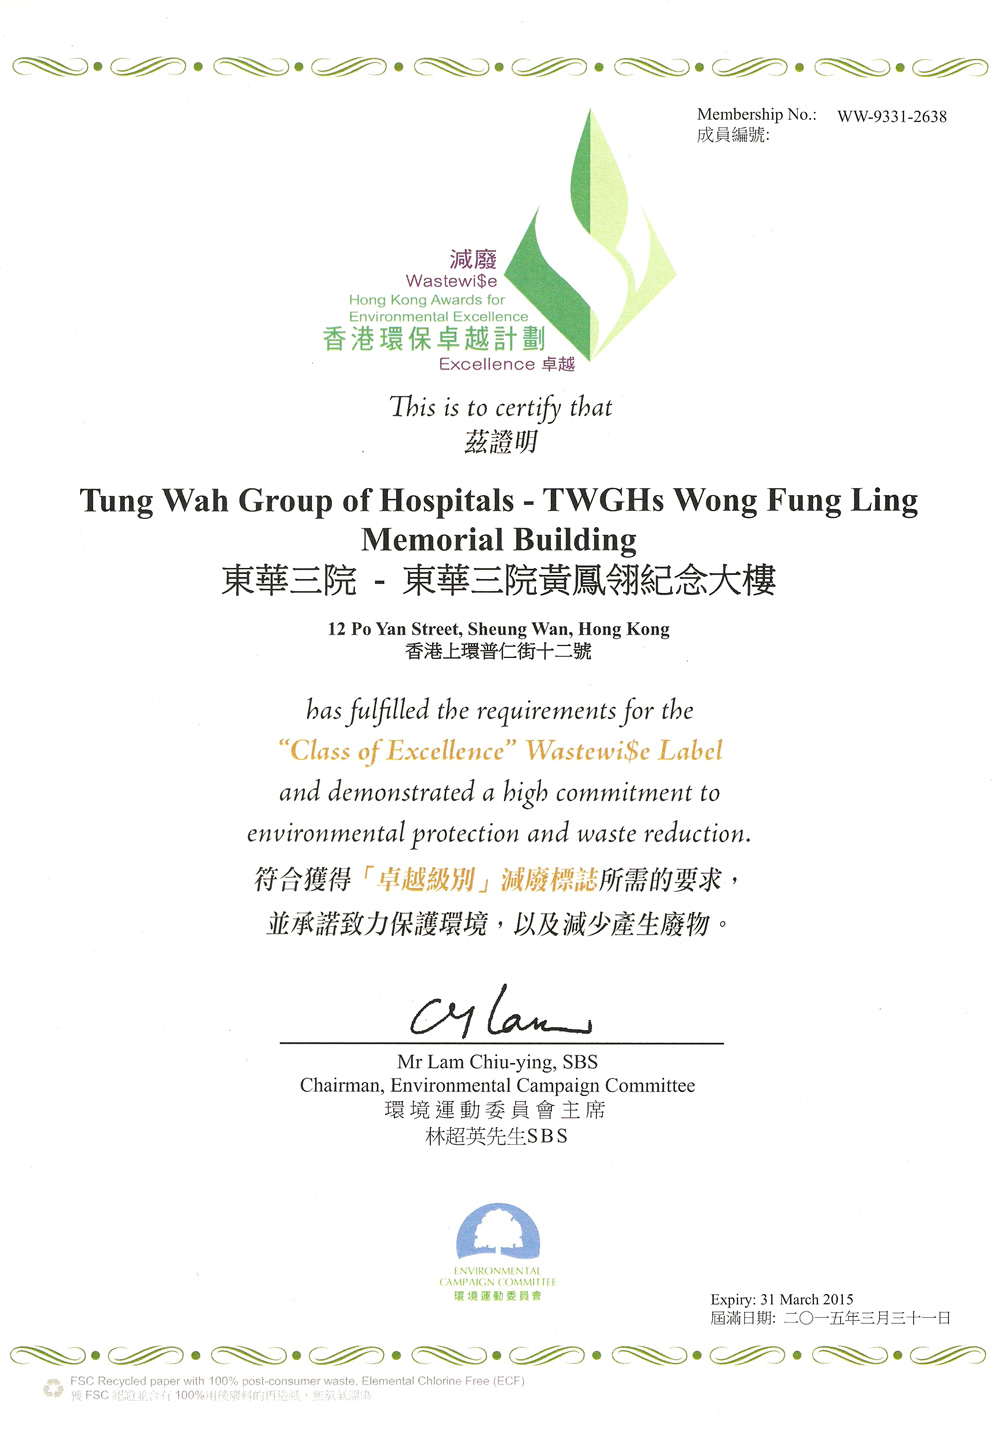 TWGHs awarded the “Class of Excellence” Wastewi$e Label under the Hong Kong Awards for Environmental